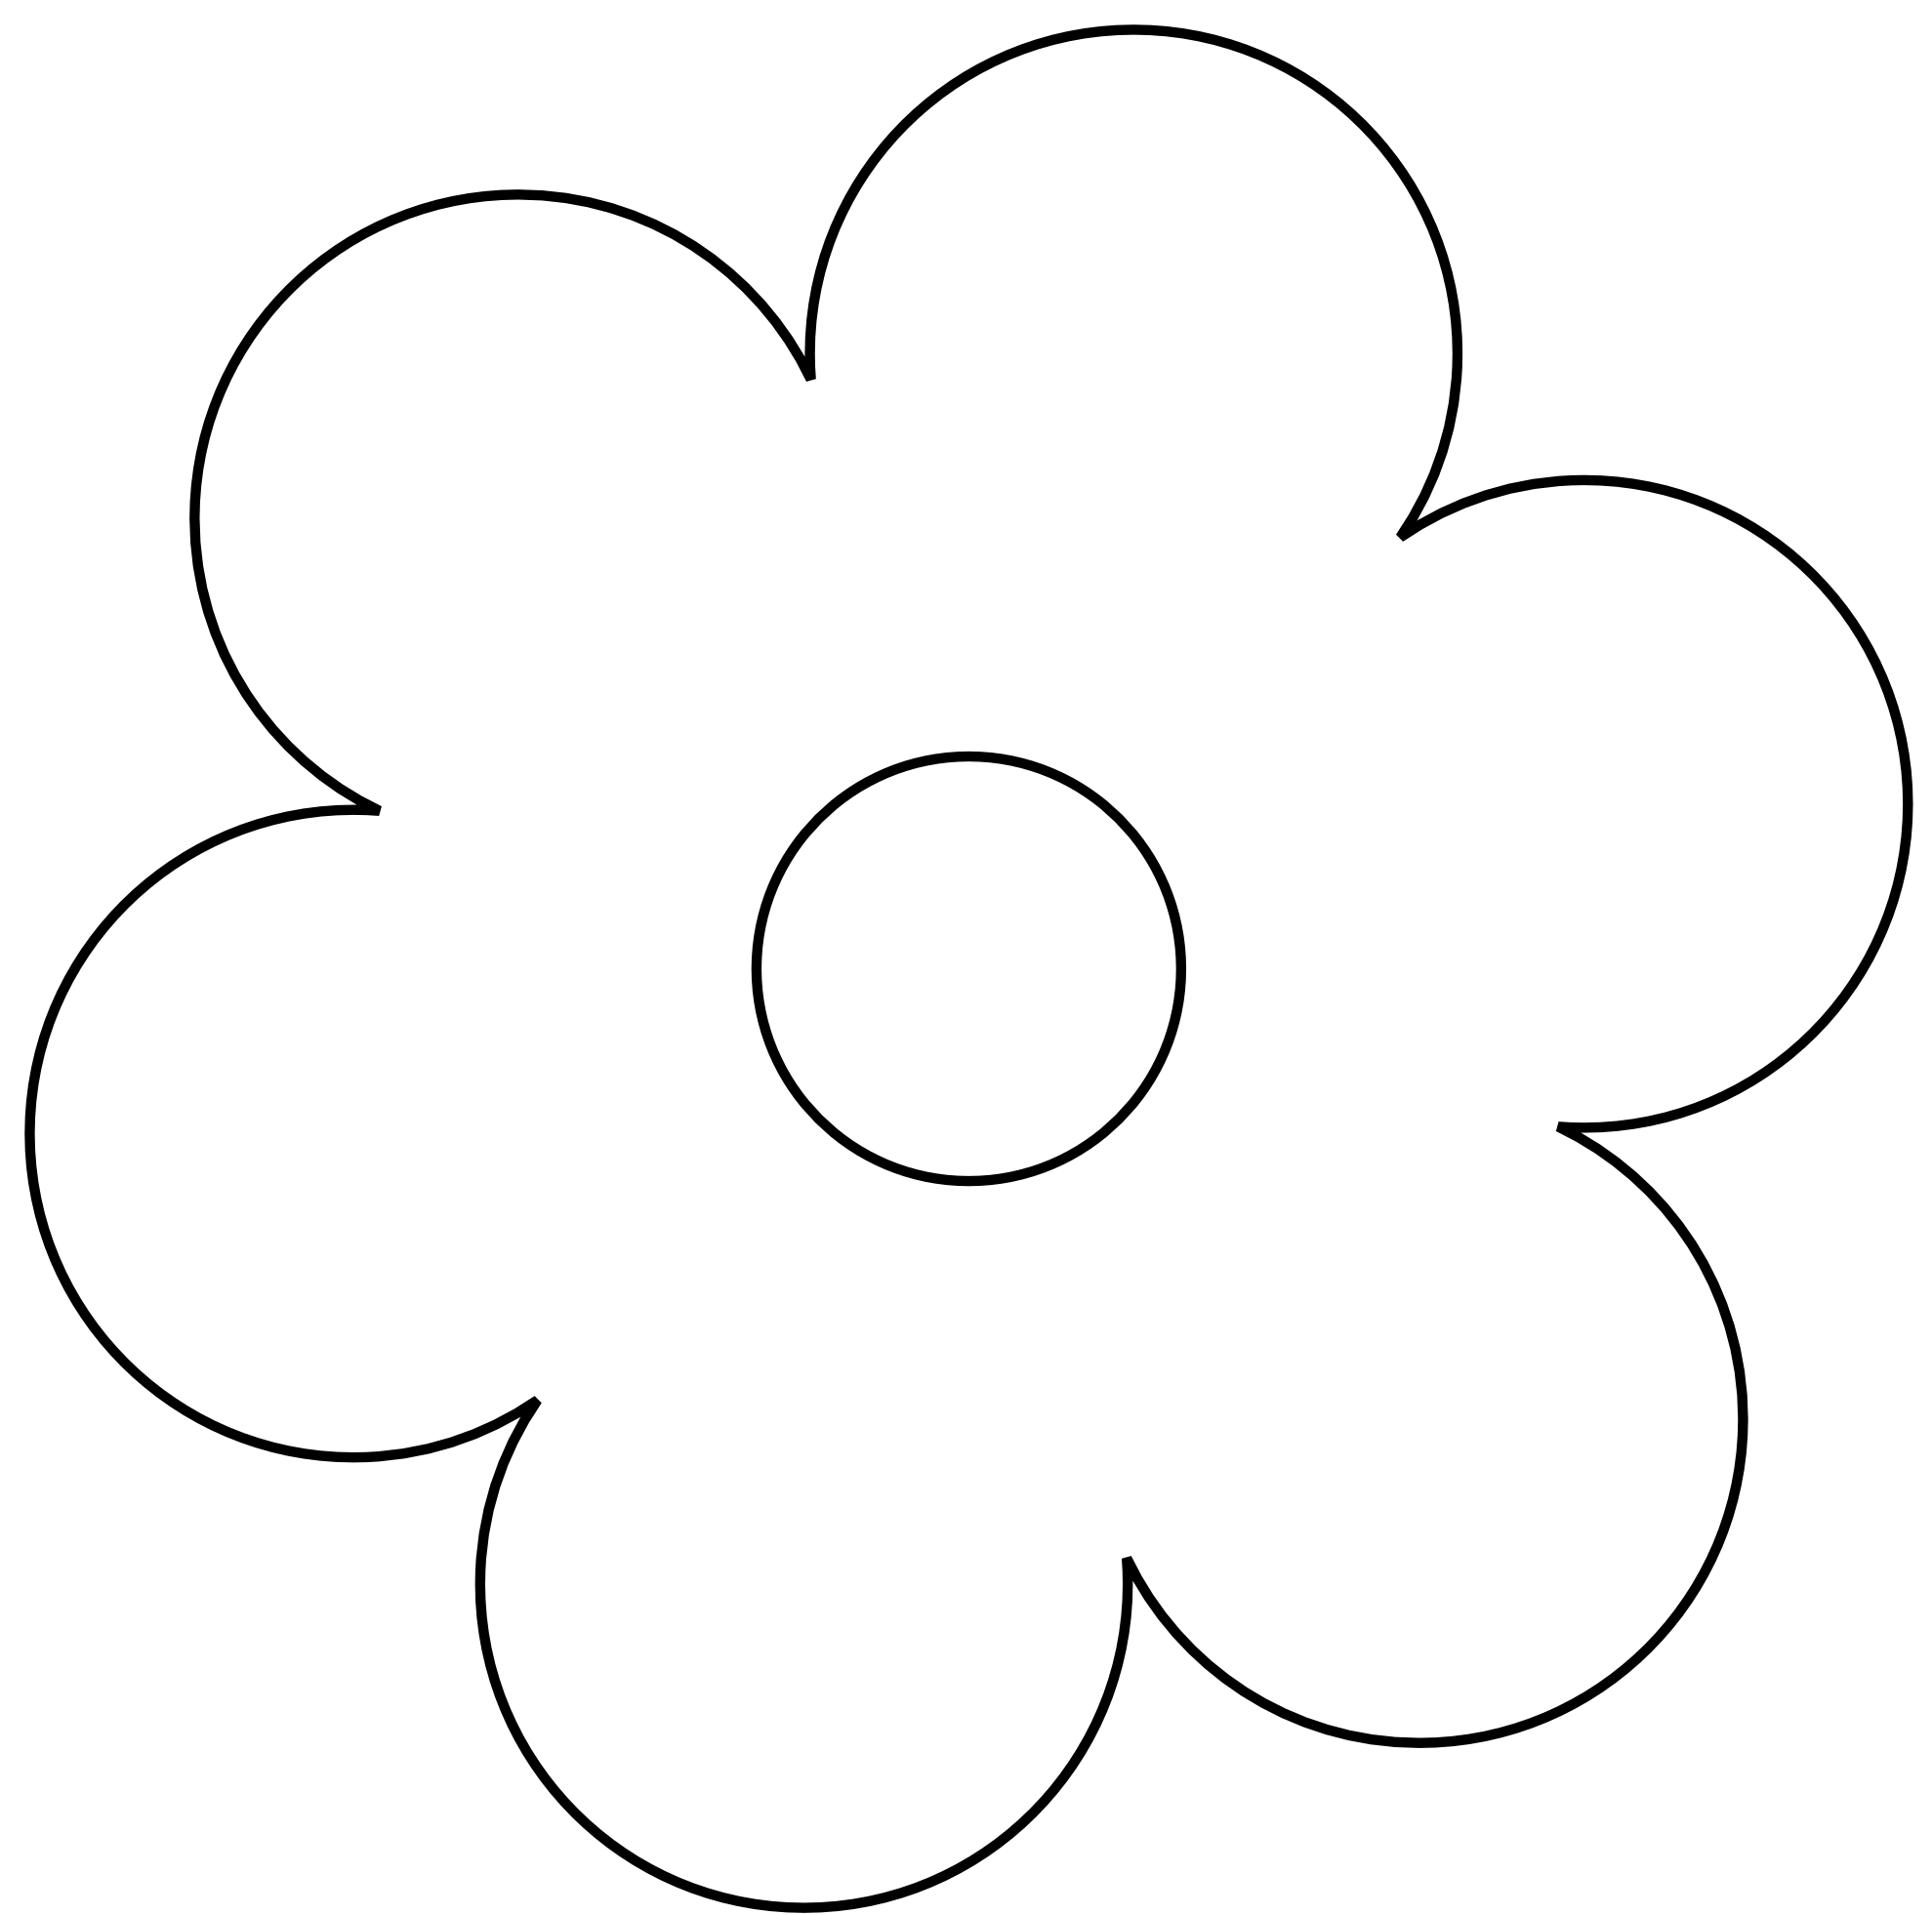 clipart of flowers black and white - photo #30